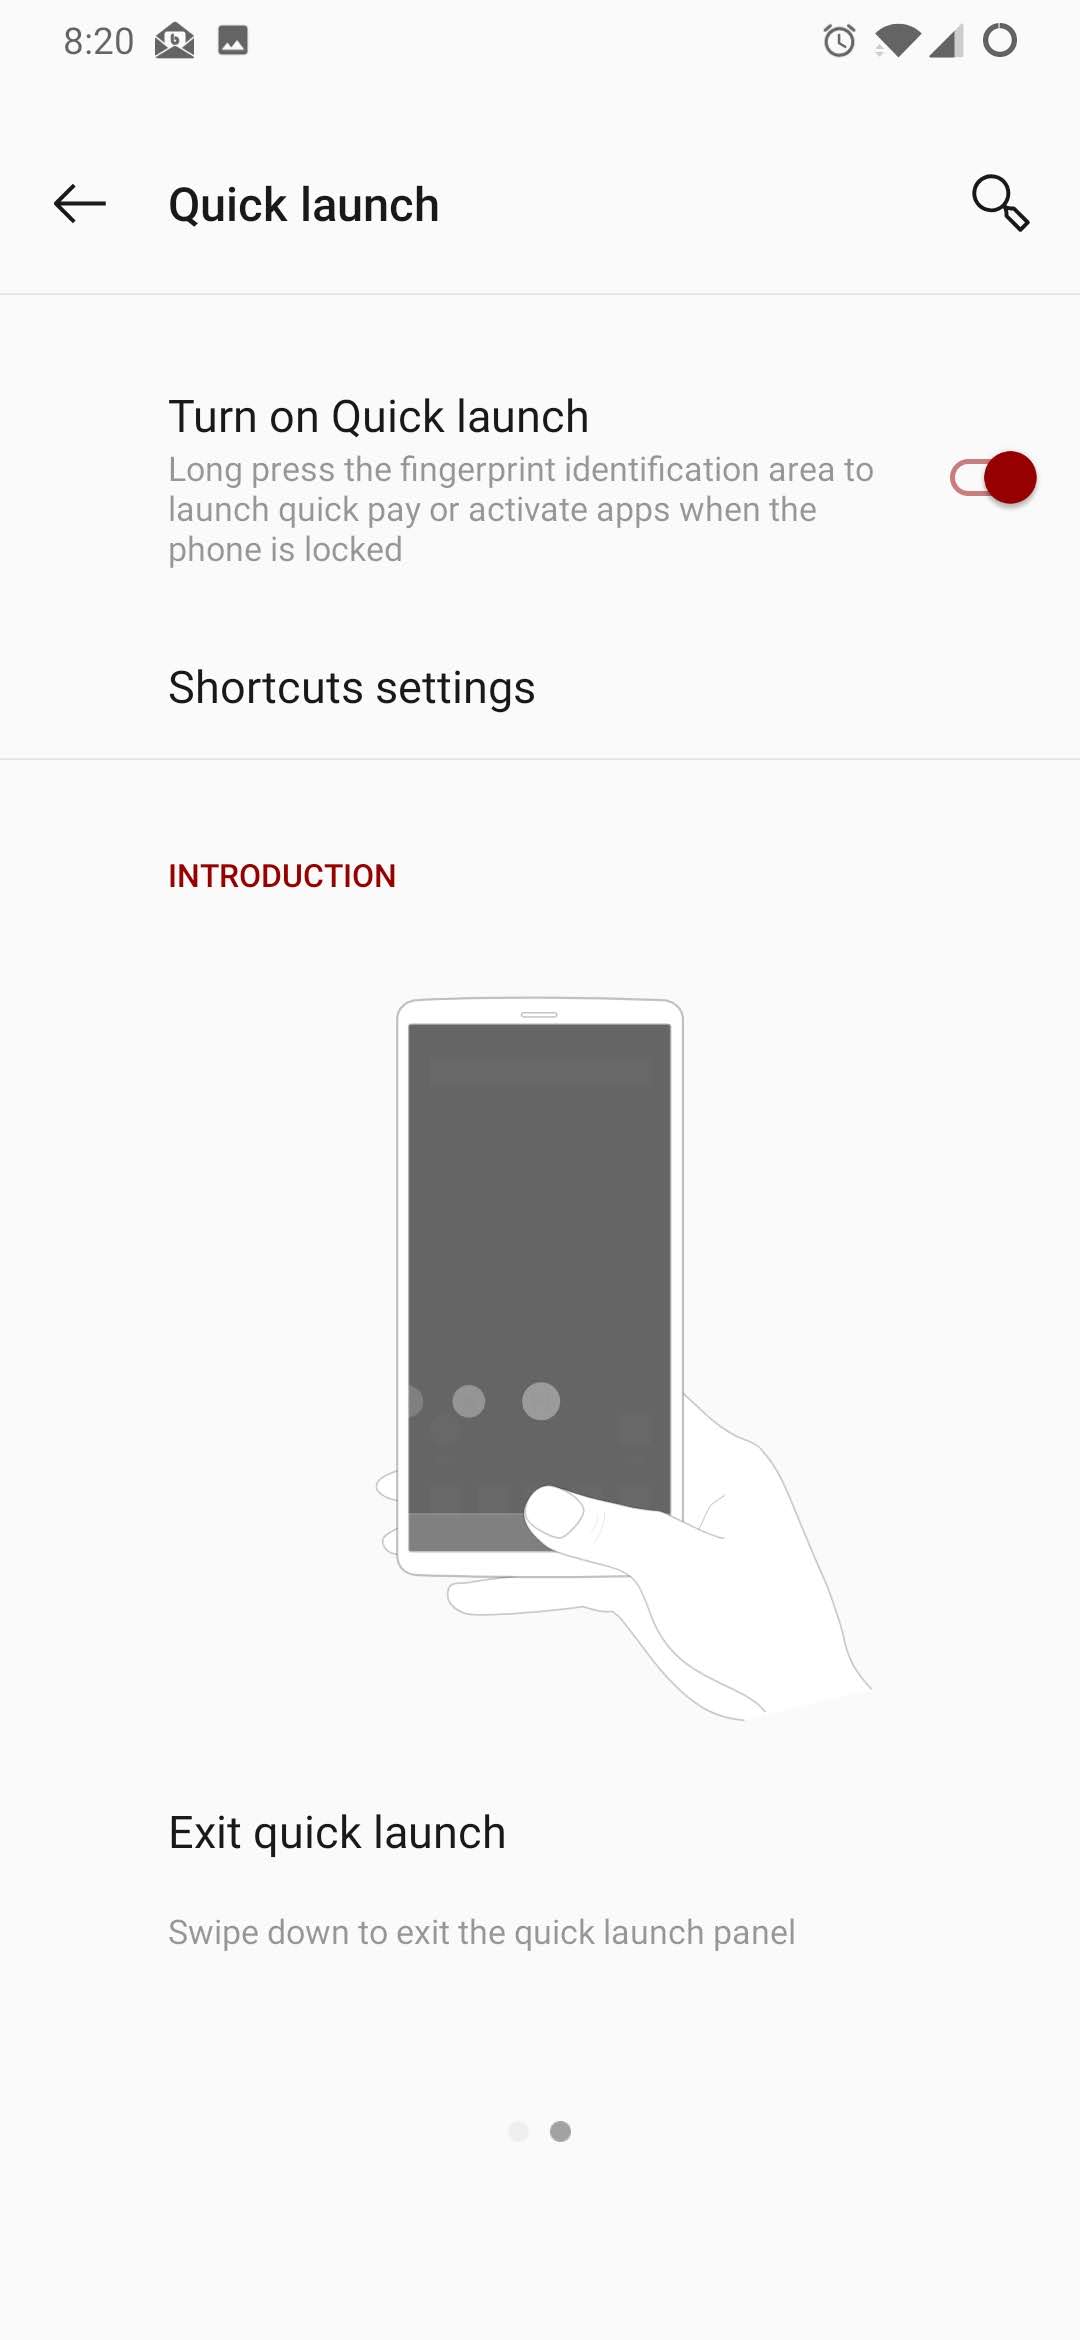 Quick Launch settings on the OnePlus 6T.